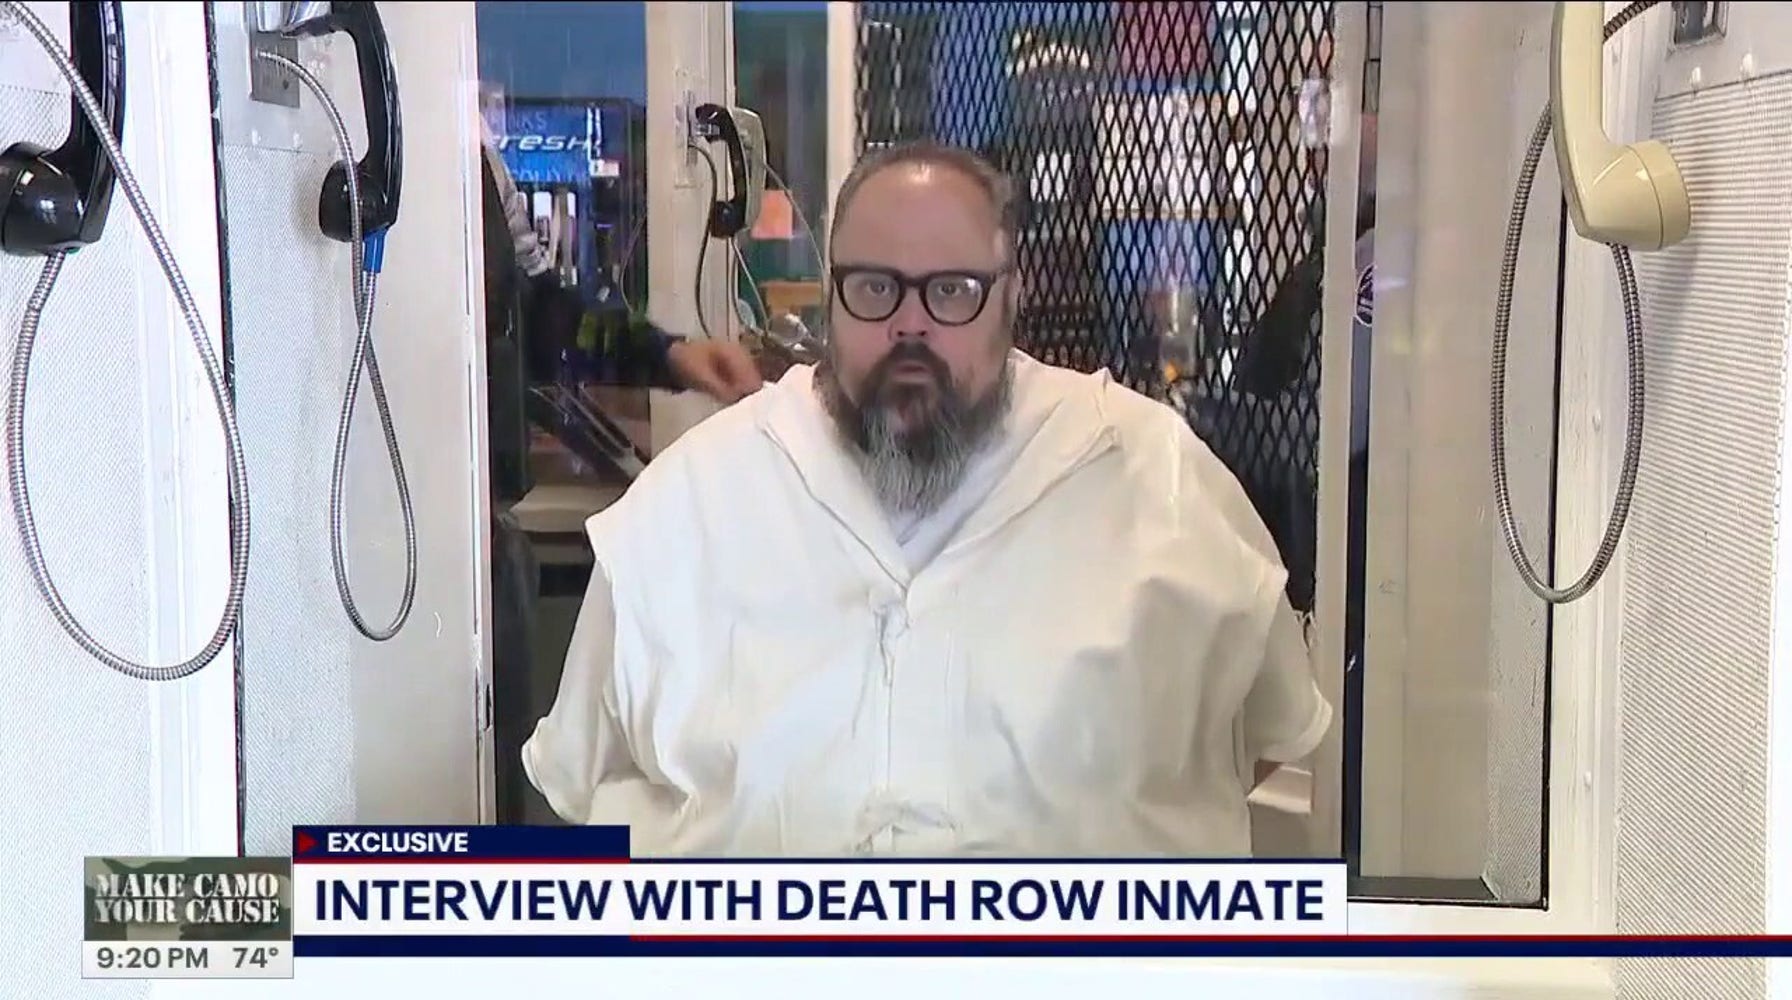 Oklahoma Death Row Inmate Executed for Double Killing After 3 Last Words